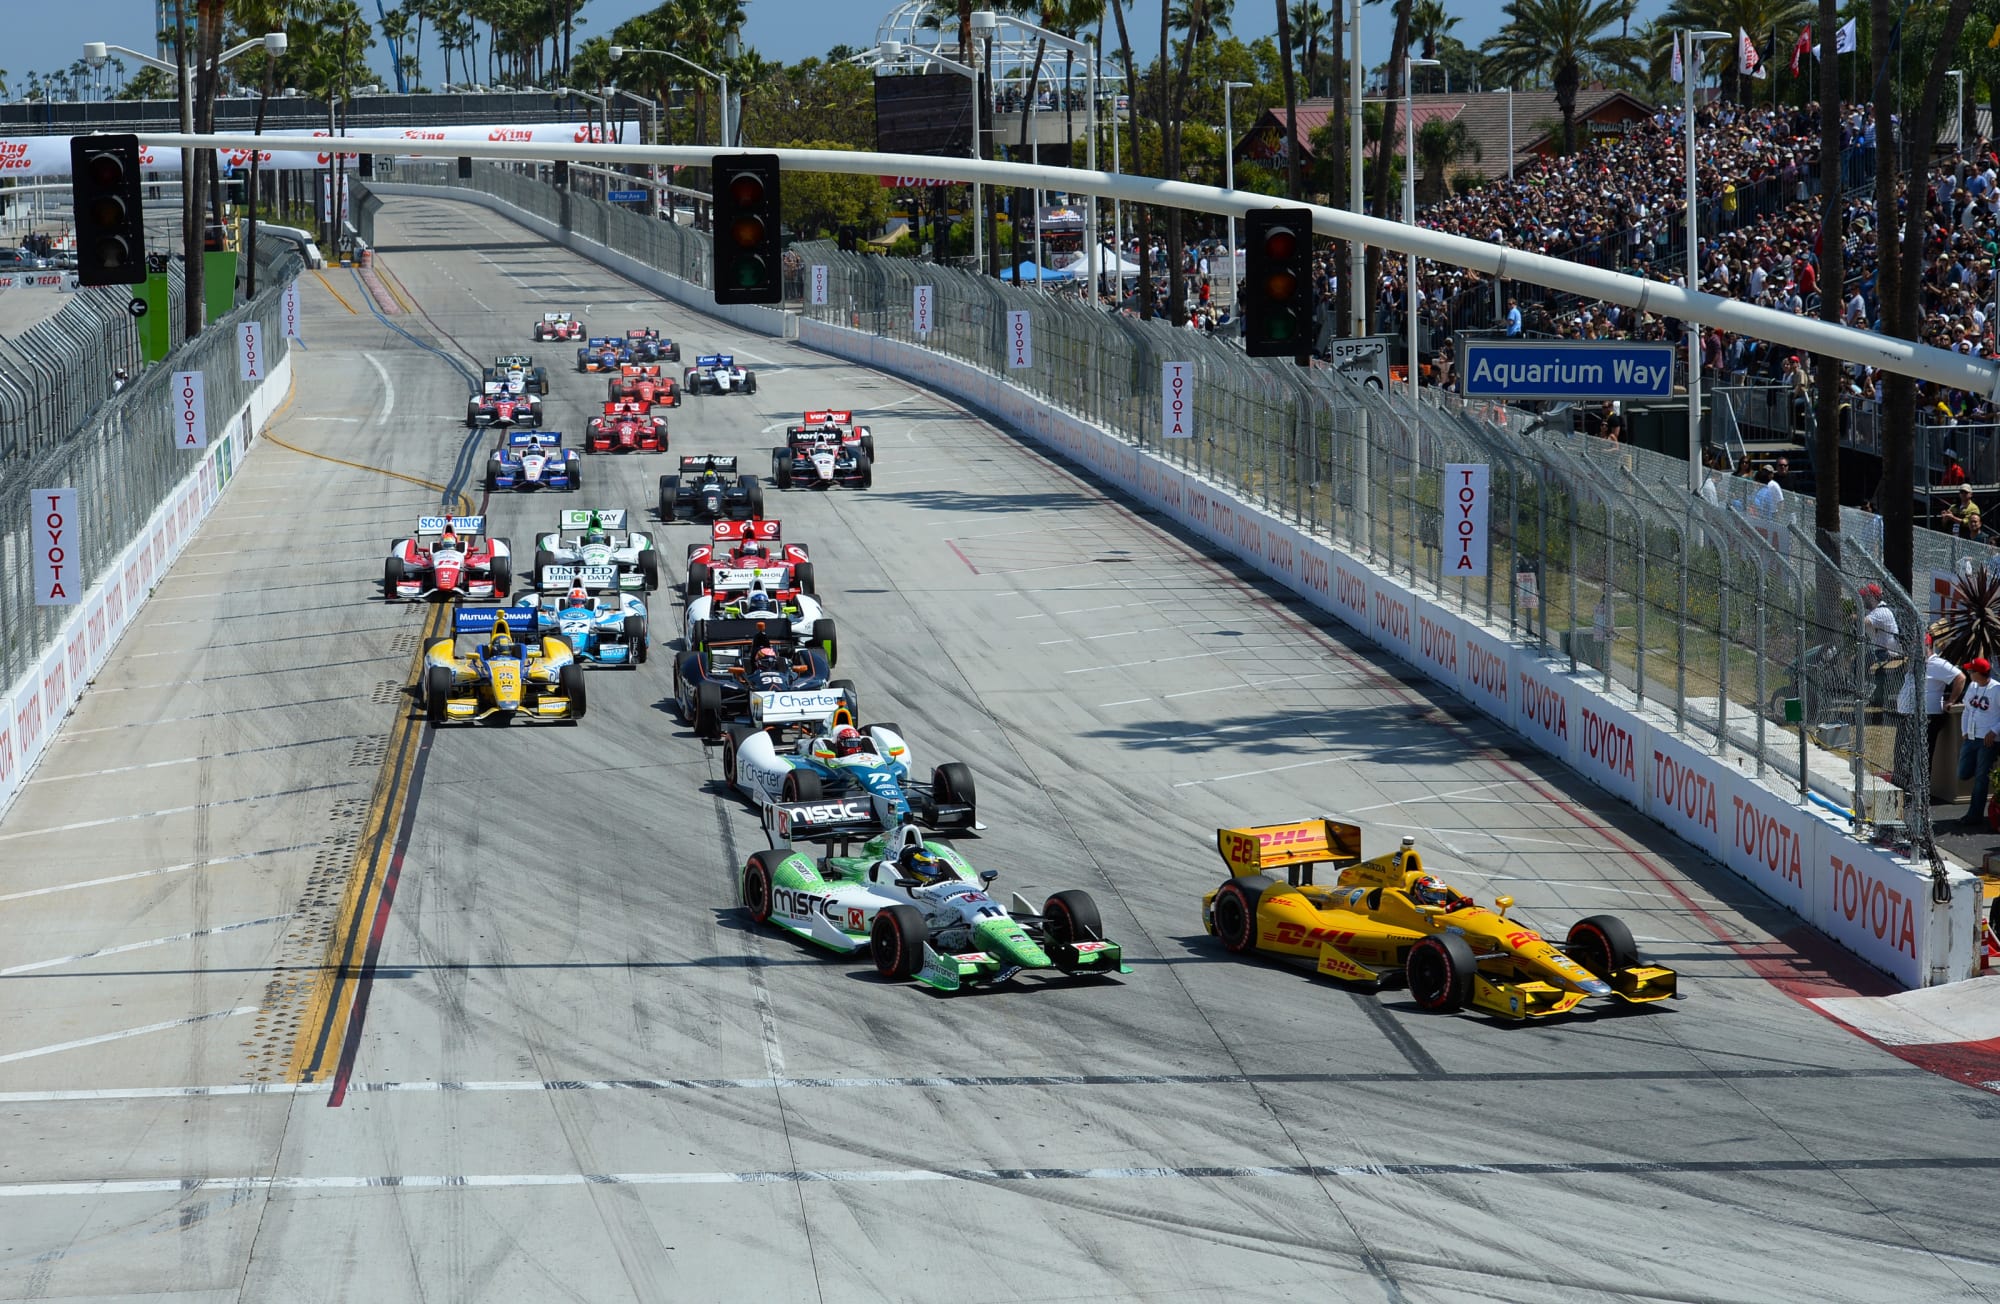 IndyCar Acura to serve as title sponsor for Grand Prix of Long Beach